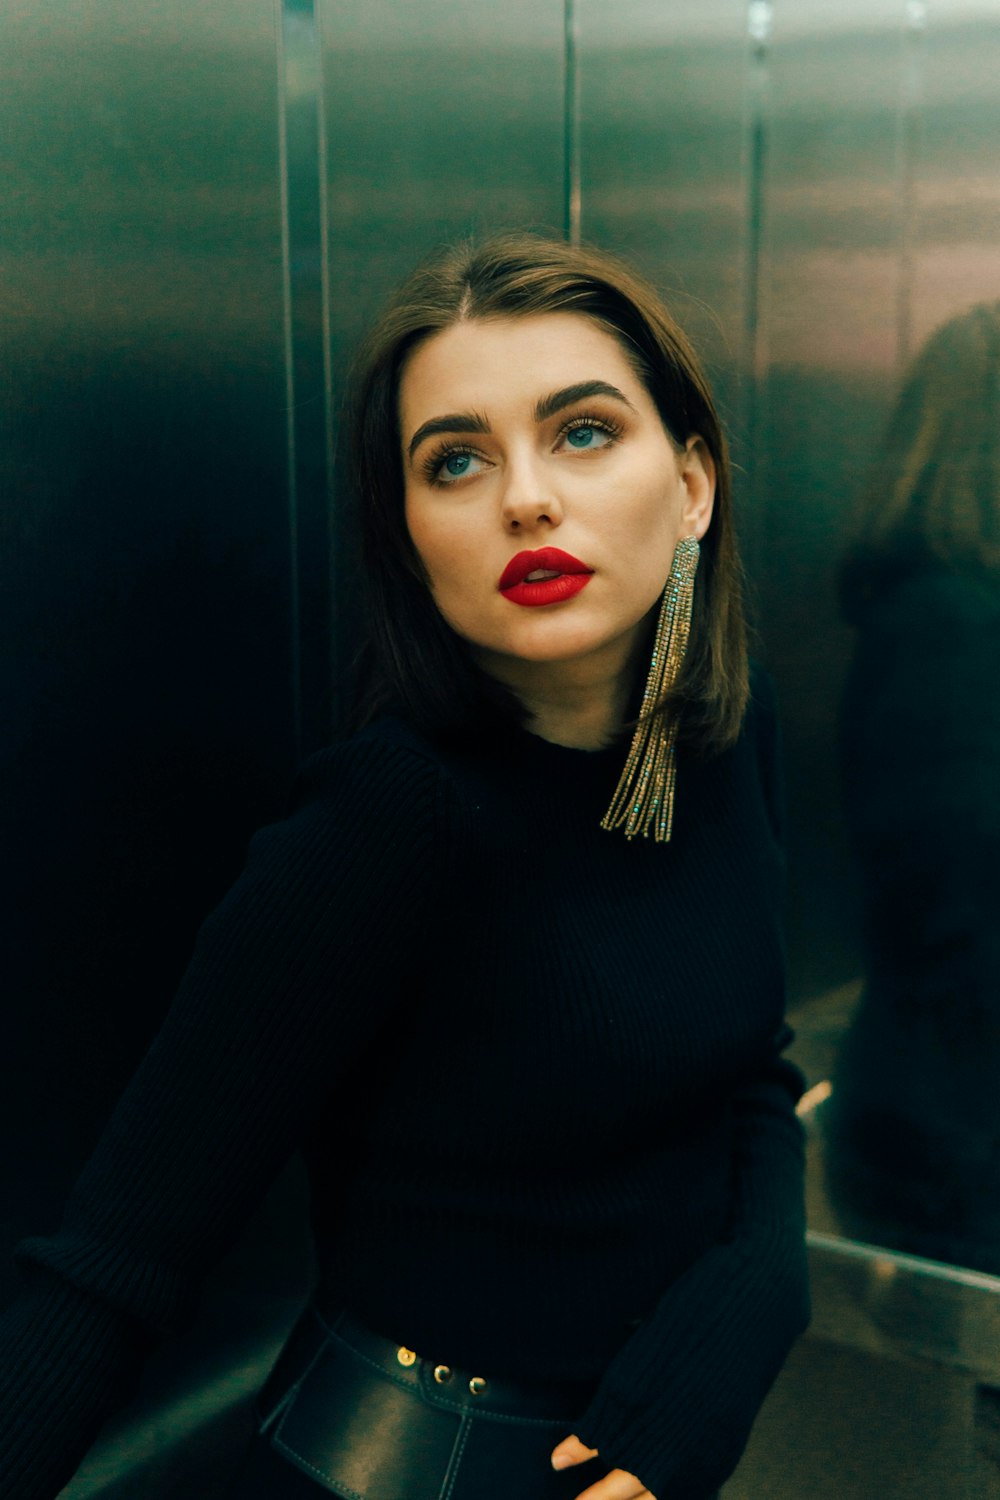 a woman standing in a elevator with a red lipstick